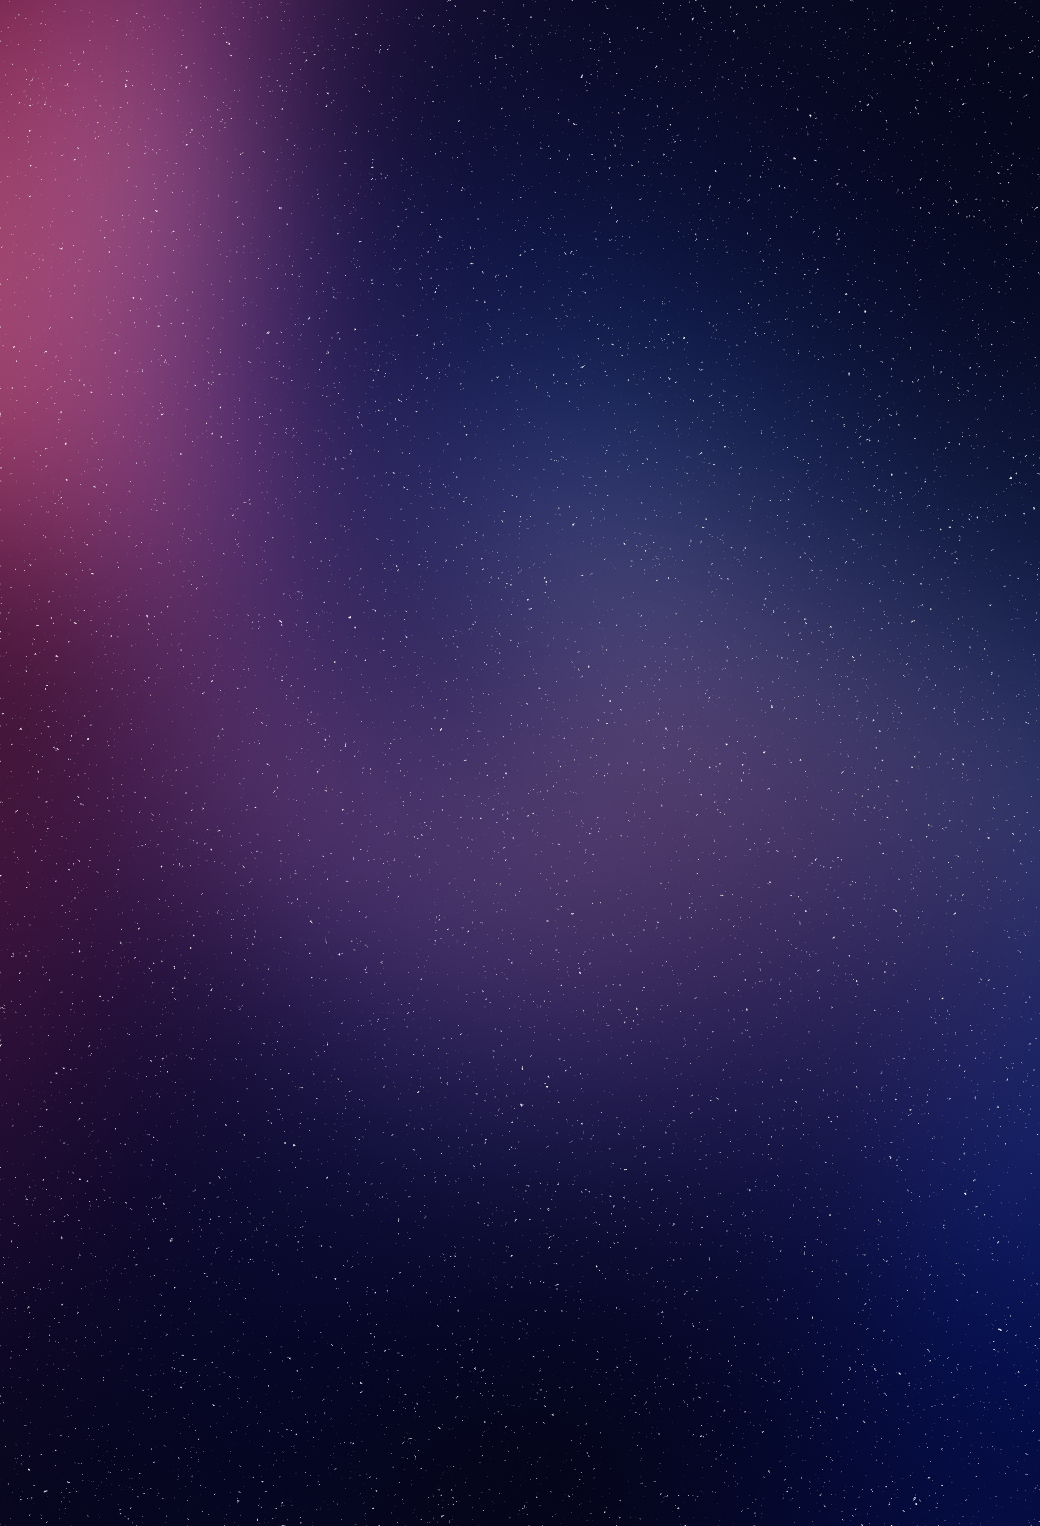 21 MORE Impressive iOS 7 Parallax Wallpapers to Download